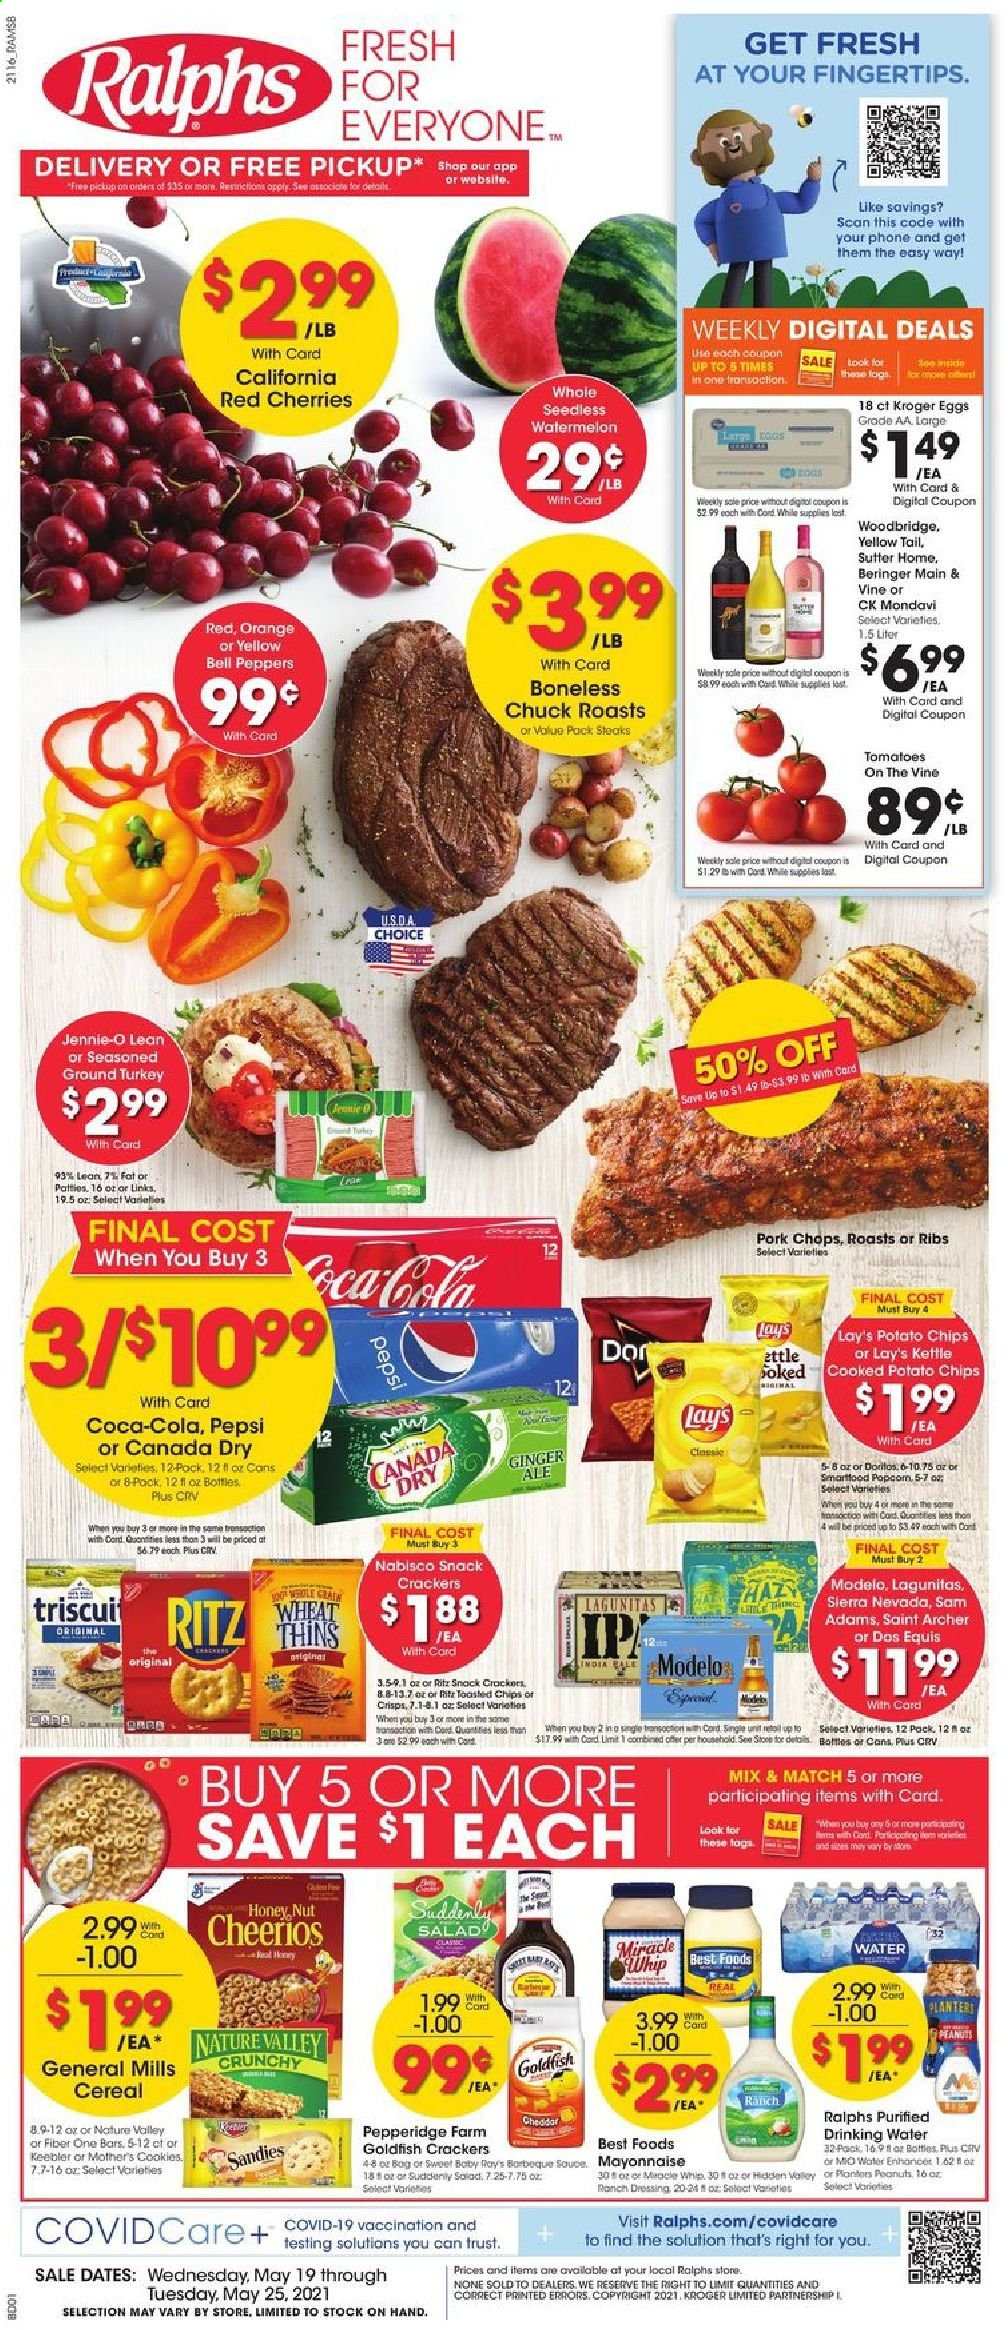 thumbnail - Ralphs Flyer - 05/19/2021 - 05/25/2021 - Sales products - bell peppers, ginger, tomatoes, peppers, watermelon, cherries, oranges, eggs, mayonnaise, Miracle Whip, cookies, snack, crackers, Keebler, RITZ, potato chips, chips, Lay’s, Smartfood, Thins, Goldfish, cereals, Cheerios, Nature Valley, Fiber One, dressing, peanuts, Canada Dry, Coca-Cola, Pepsi, L'Or, Woodbridge, beer, Dos Equis, Modelo, ground turkey, steak, pork chops, pork meat. Page 1.